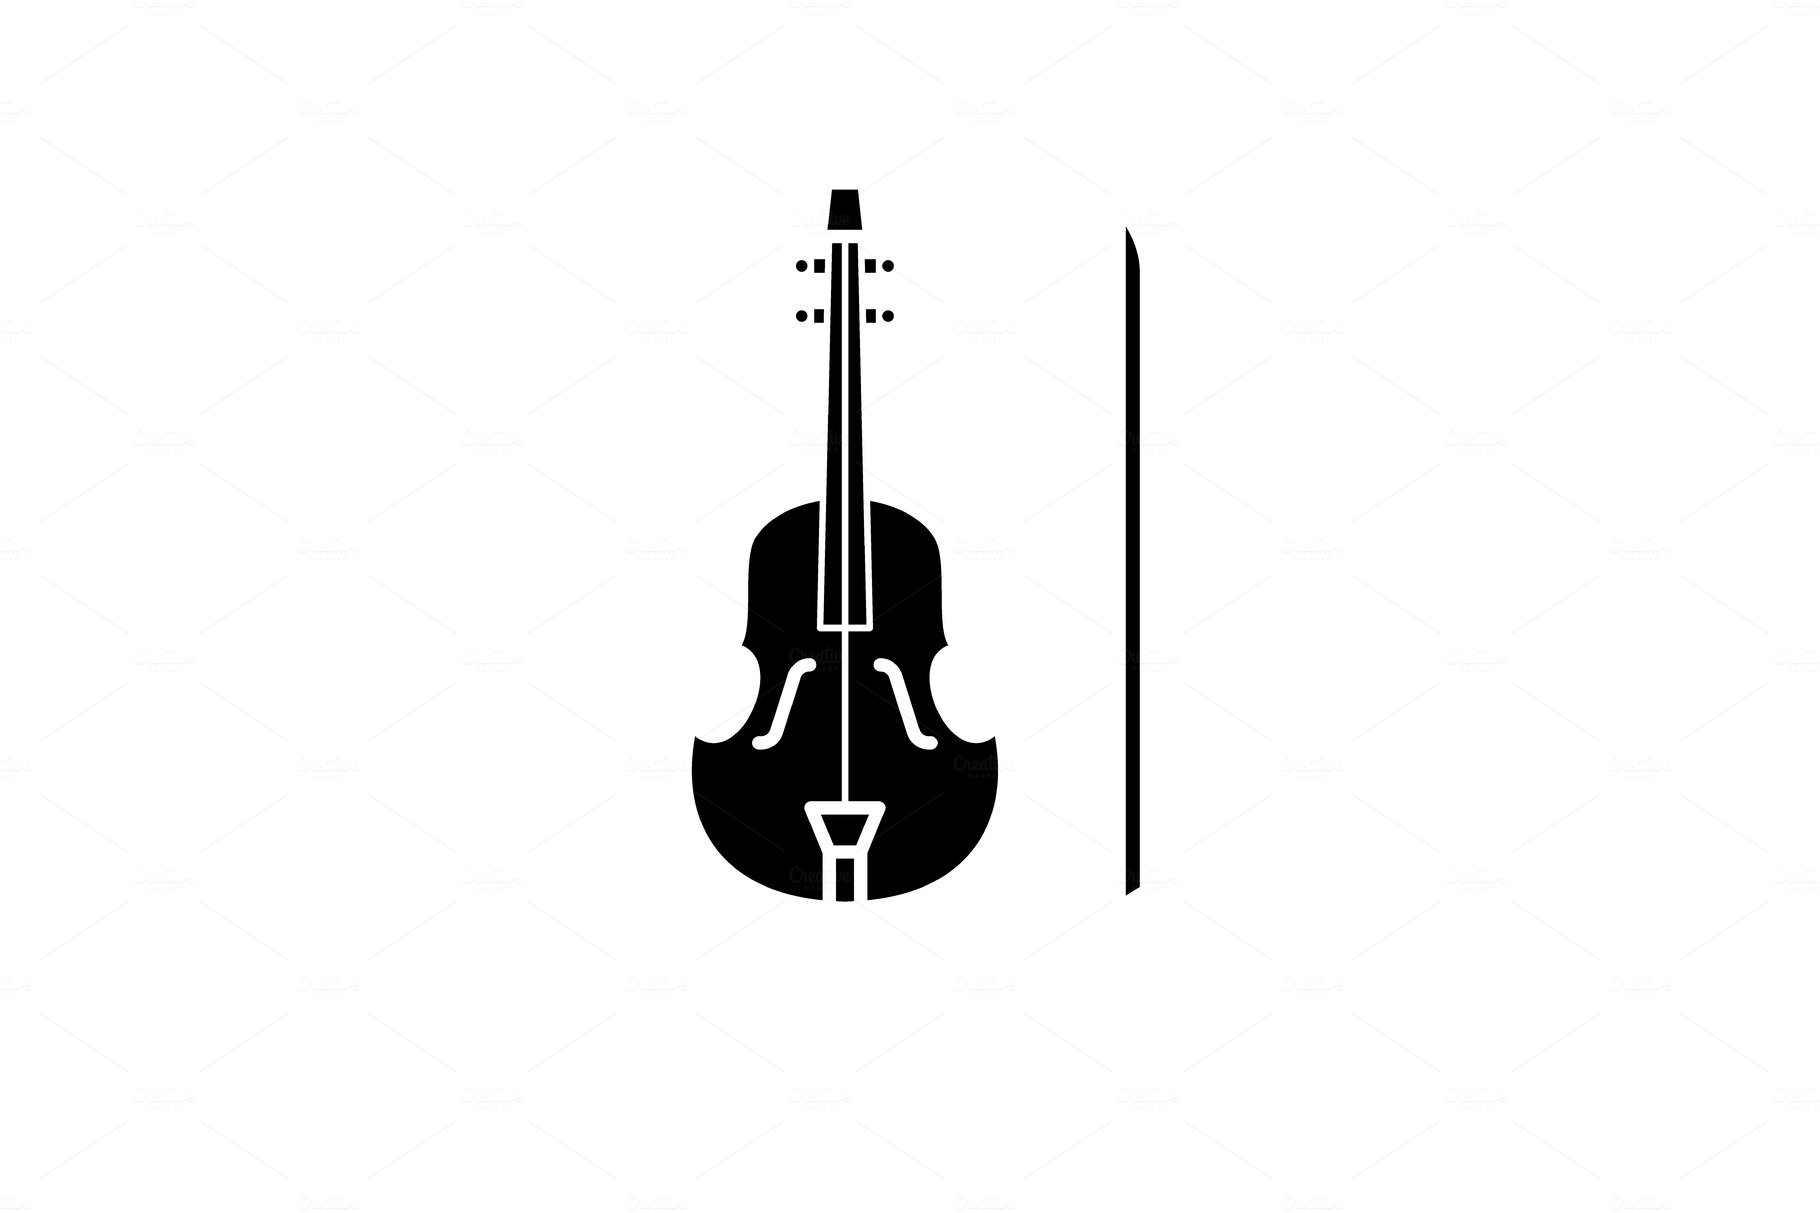 Violin black icon, vector sign on cover image.